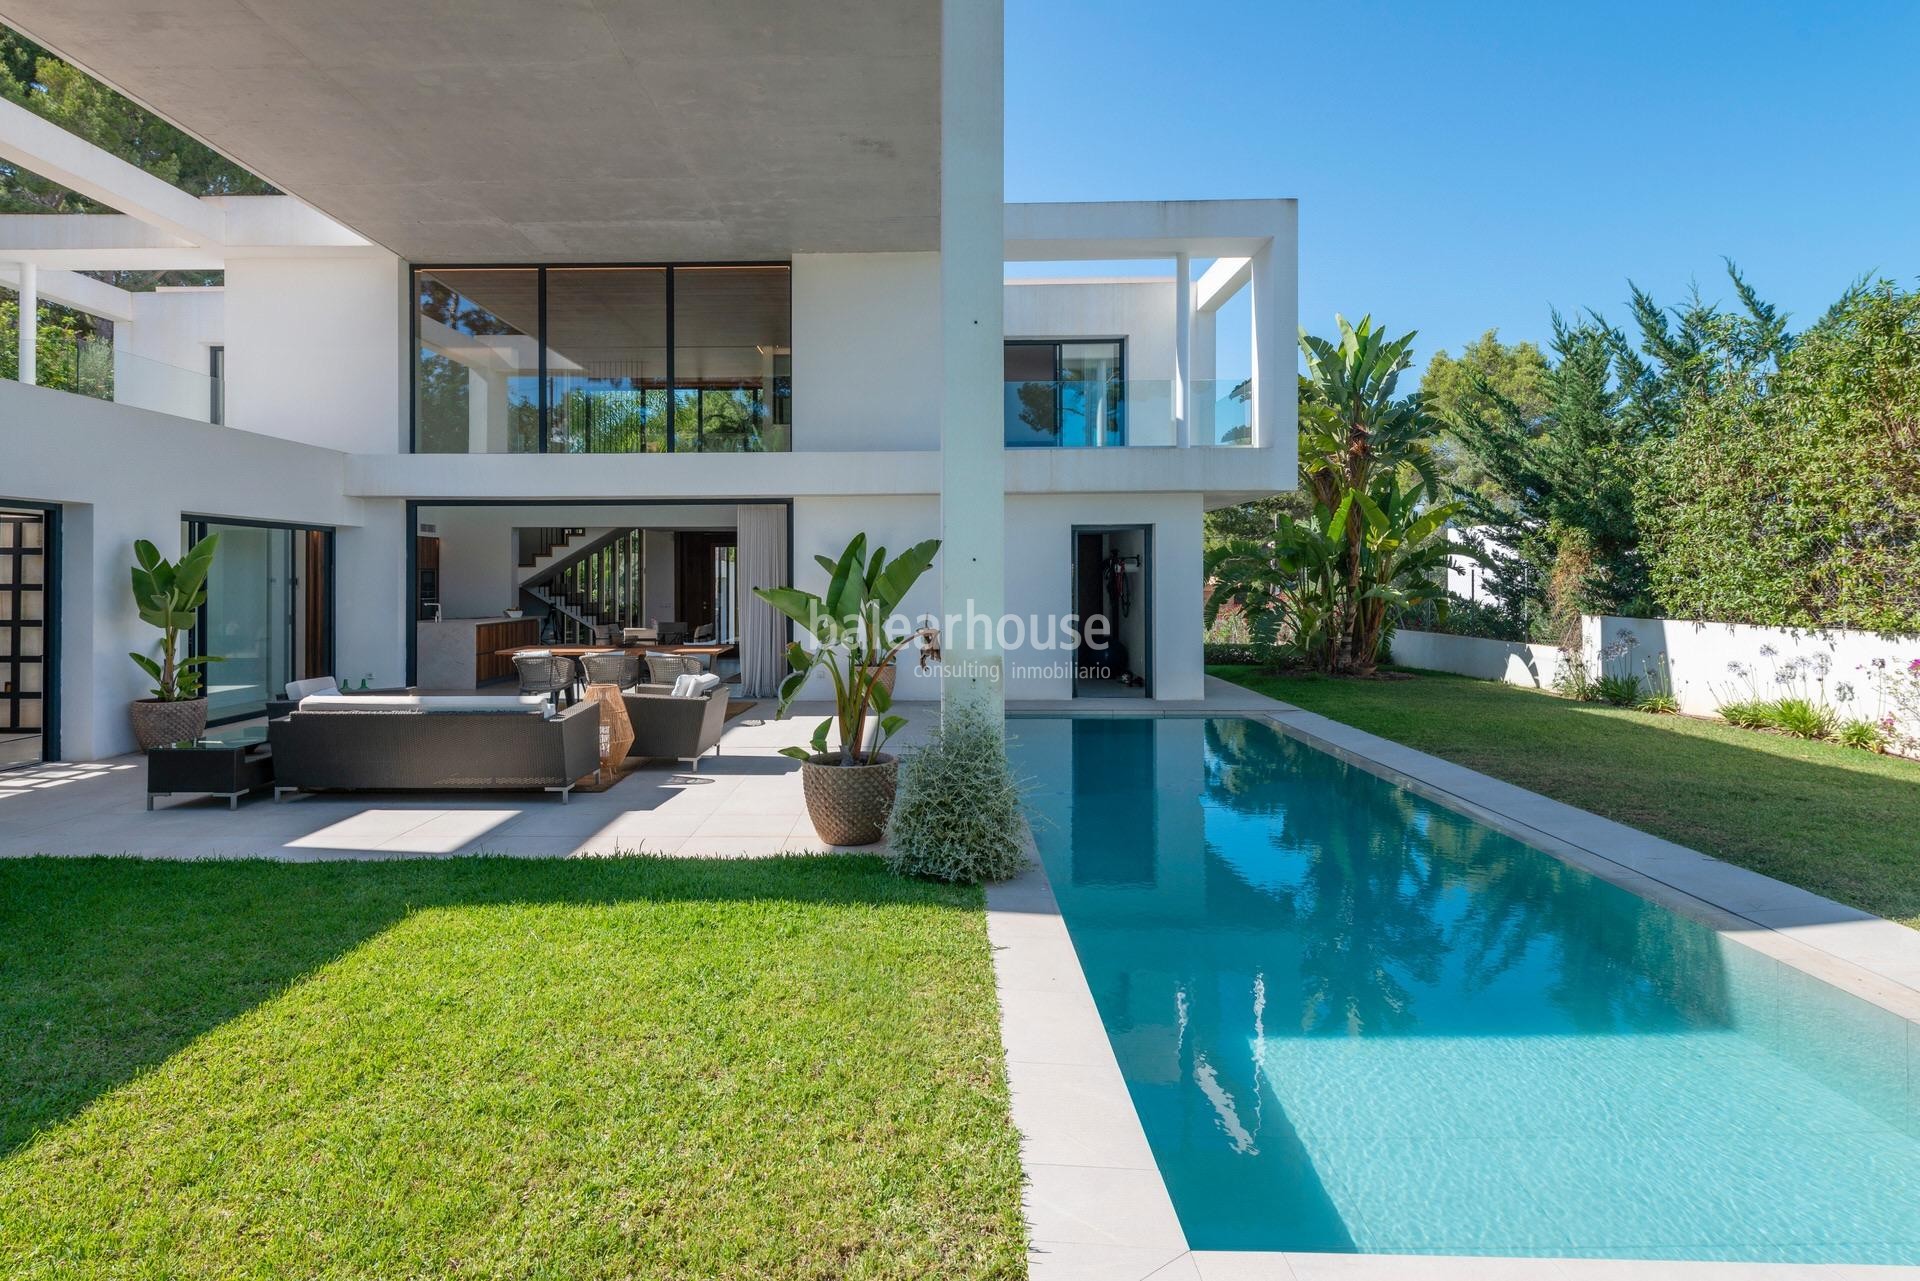 Design, light and comfort in this villa with large outdoor spaces near the beach in Santa Ponsa